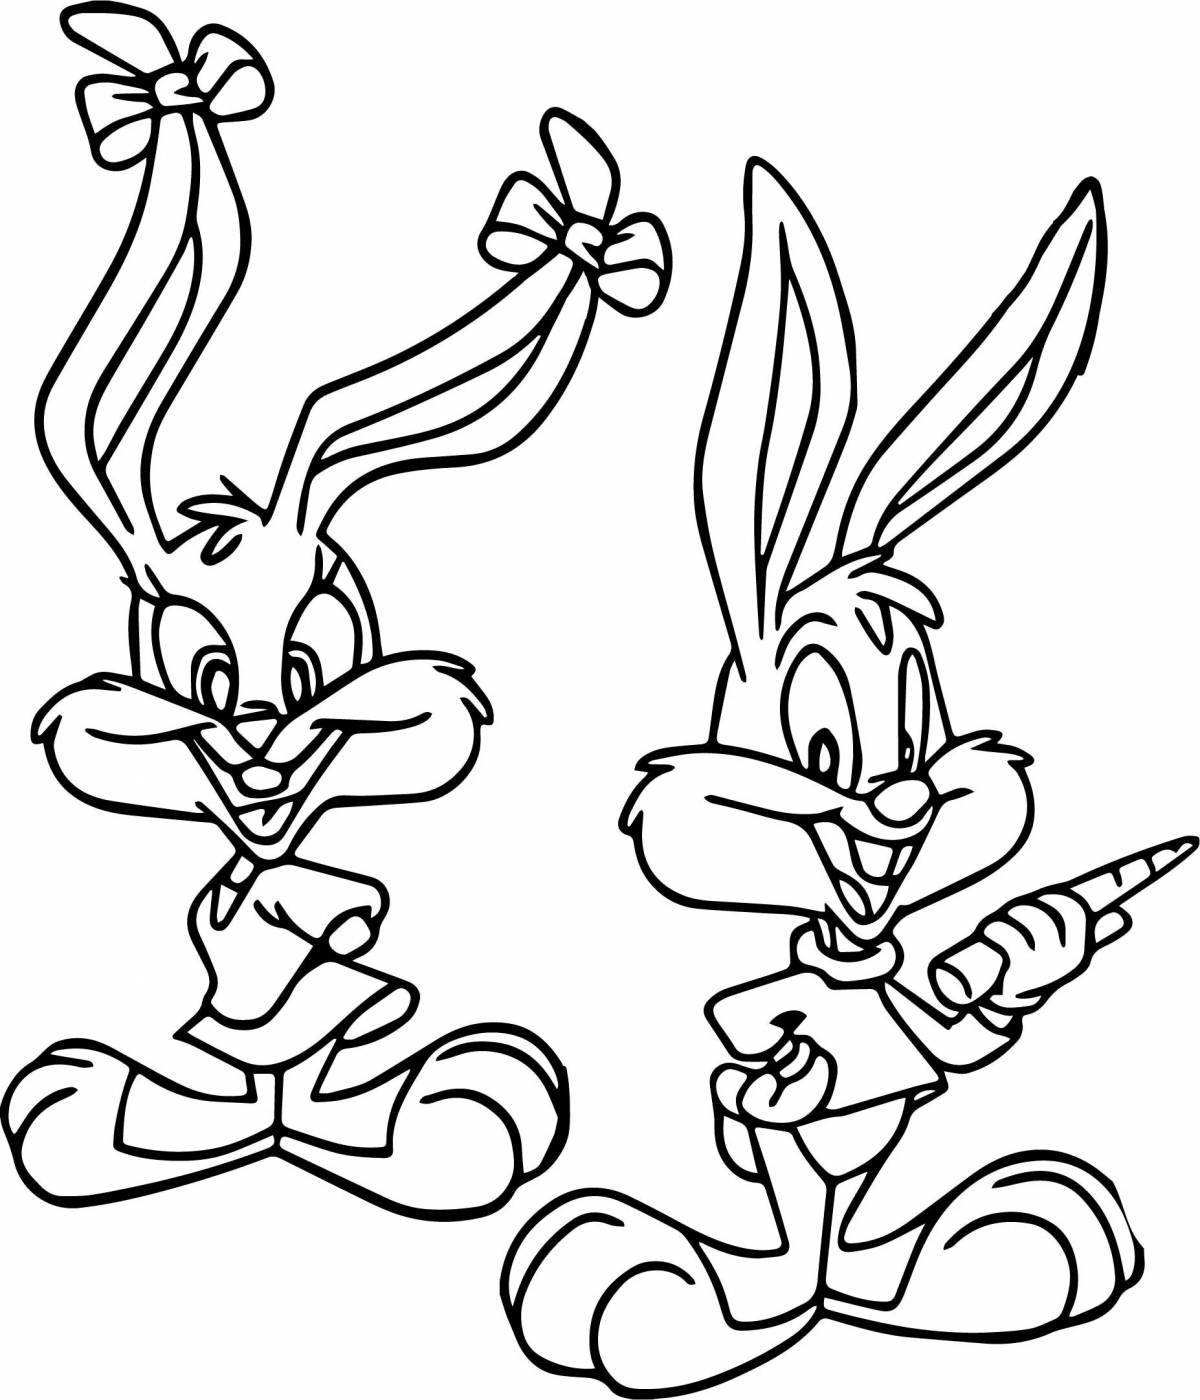 Charming bugs bunny coloring book